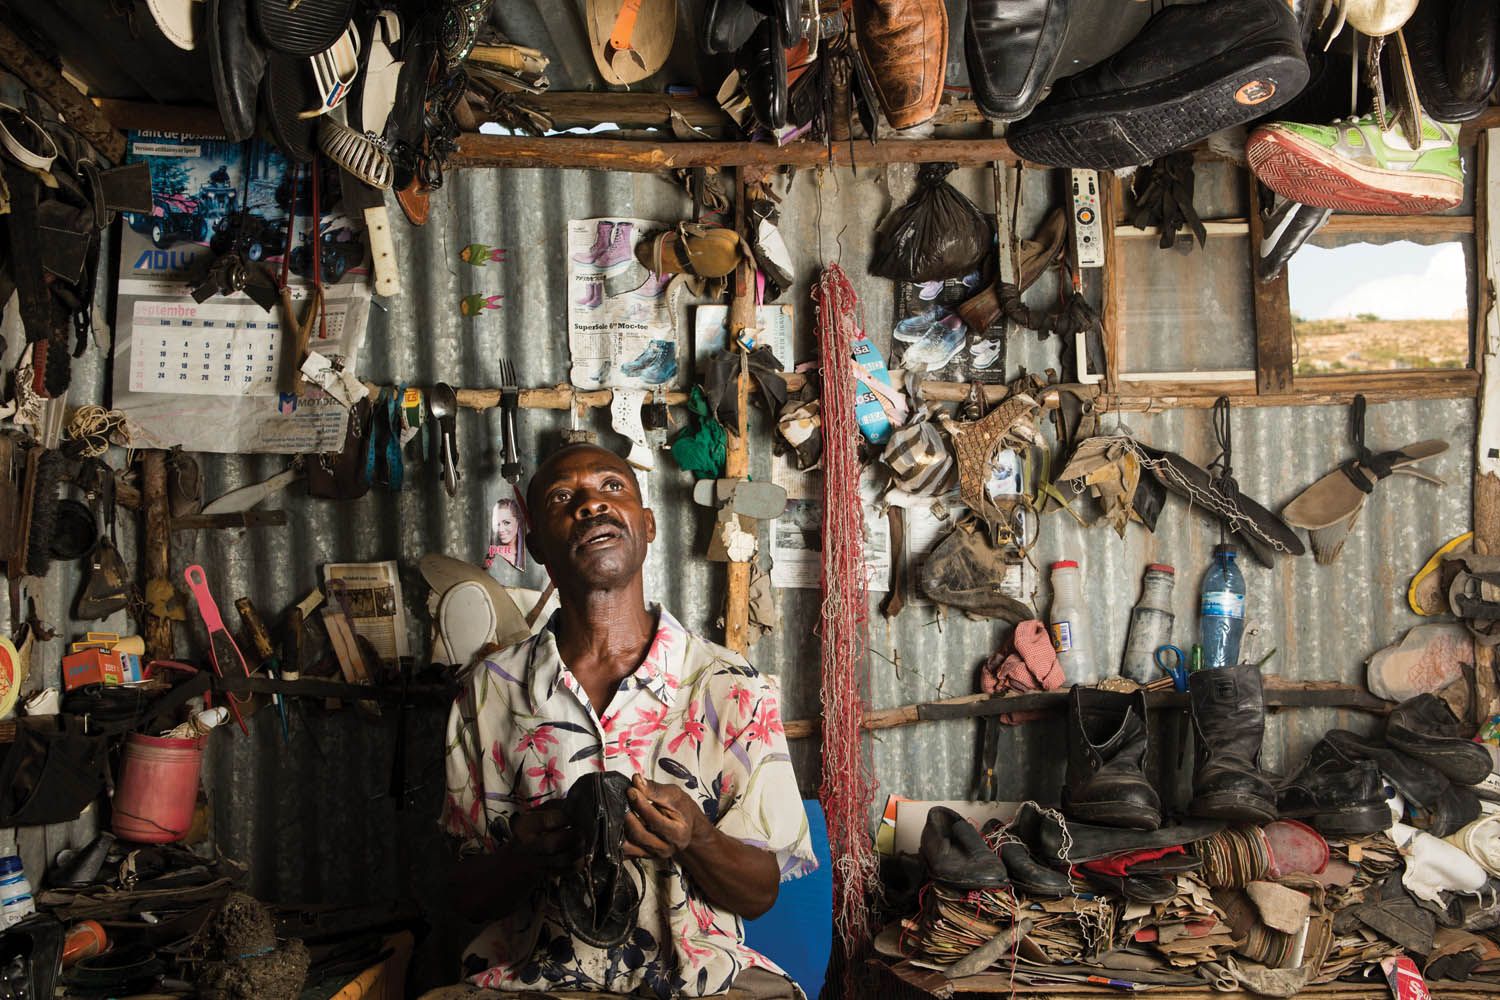 Eddy Bien Aime fixes a pair of sandals at his business in the neighborhood known as Canaan 2. Most of his business involves selling footwear he has bought secondhandand refashioned. He moved to Canaan just days after the earthquake and claimed a large parcel of land, some of which he has since given away. Image by Allison Shelley. Haiti, 2017.
